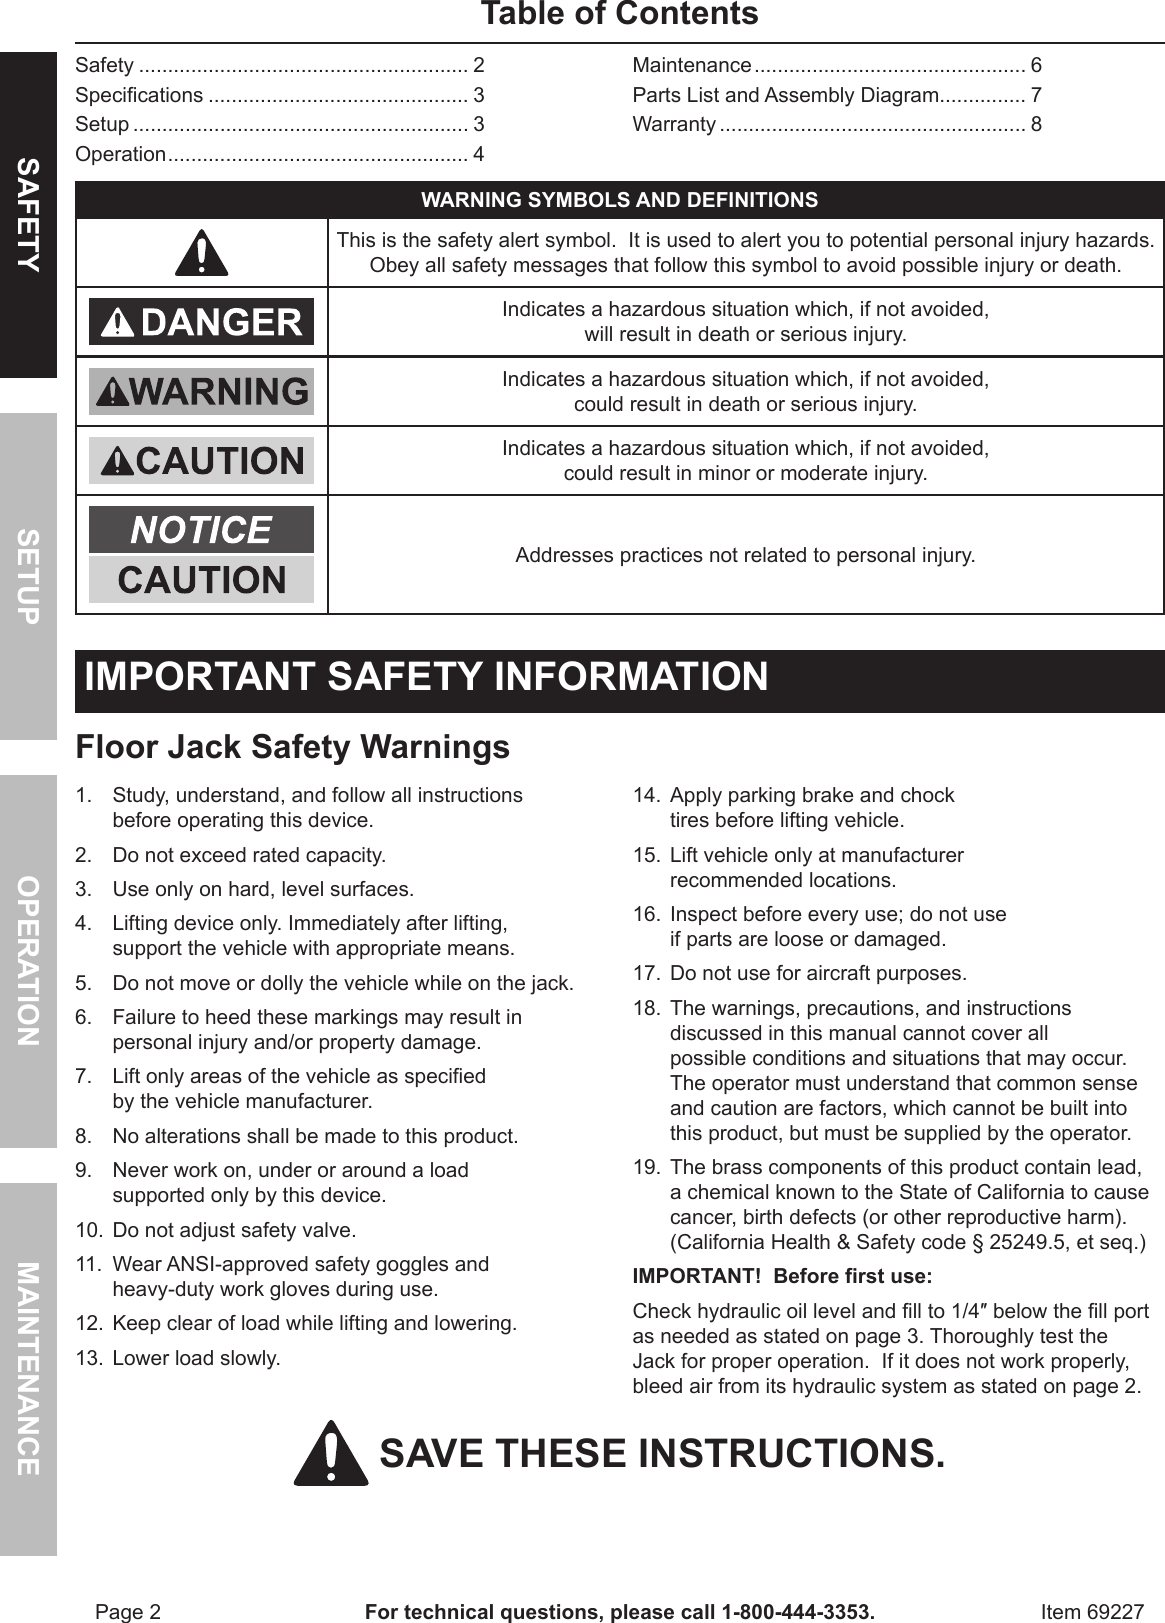 Page 2 of 8 - Harbor-Freight Harbor-Freight-69227-Owner-S-Manual